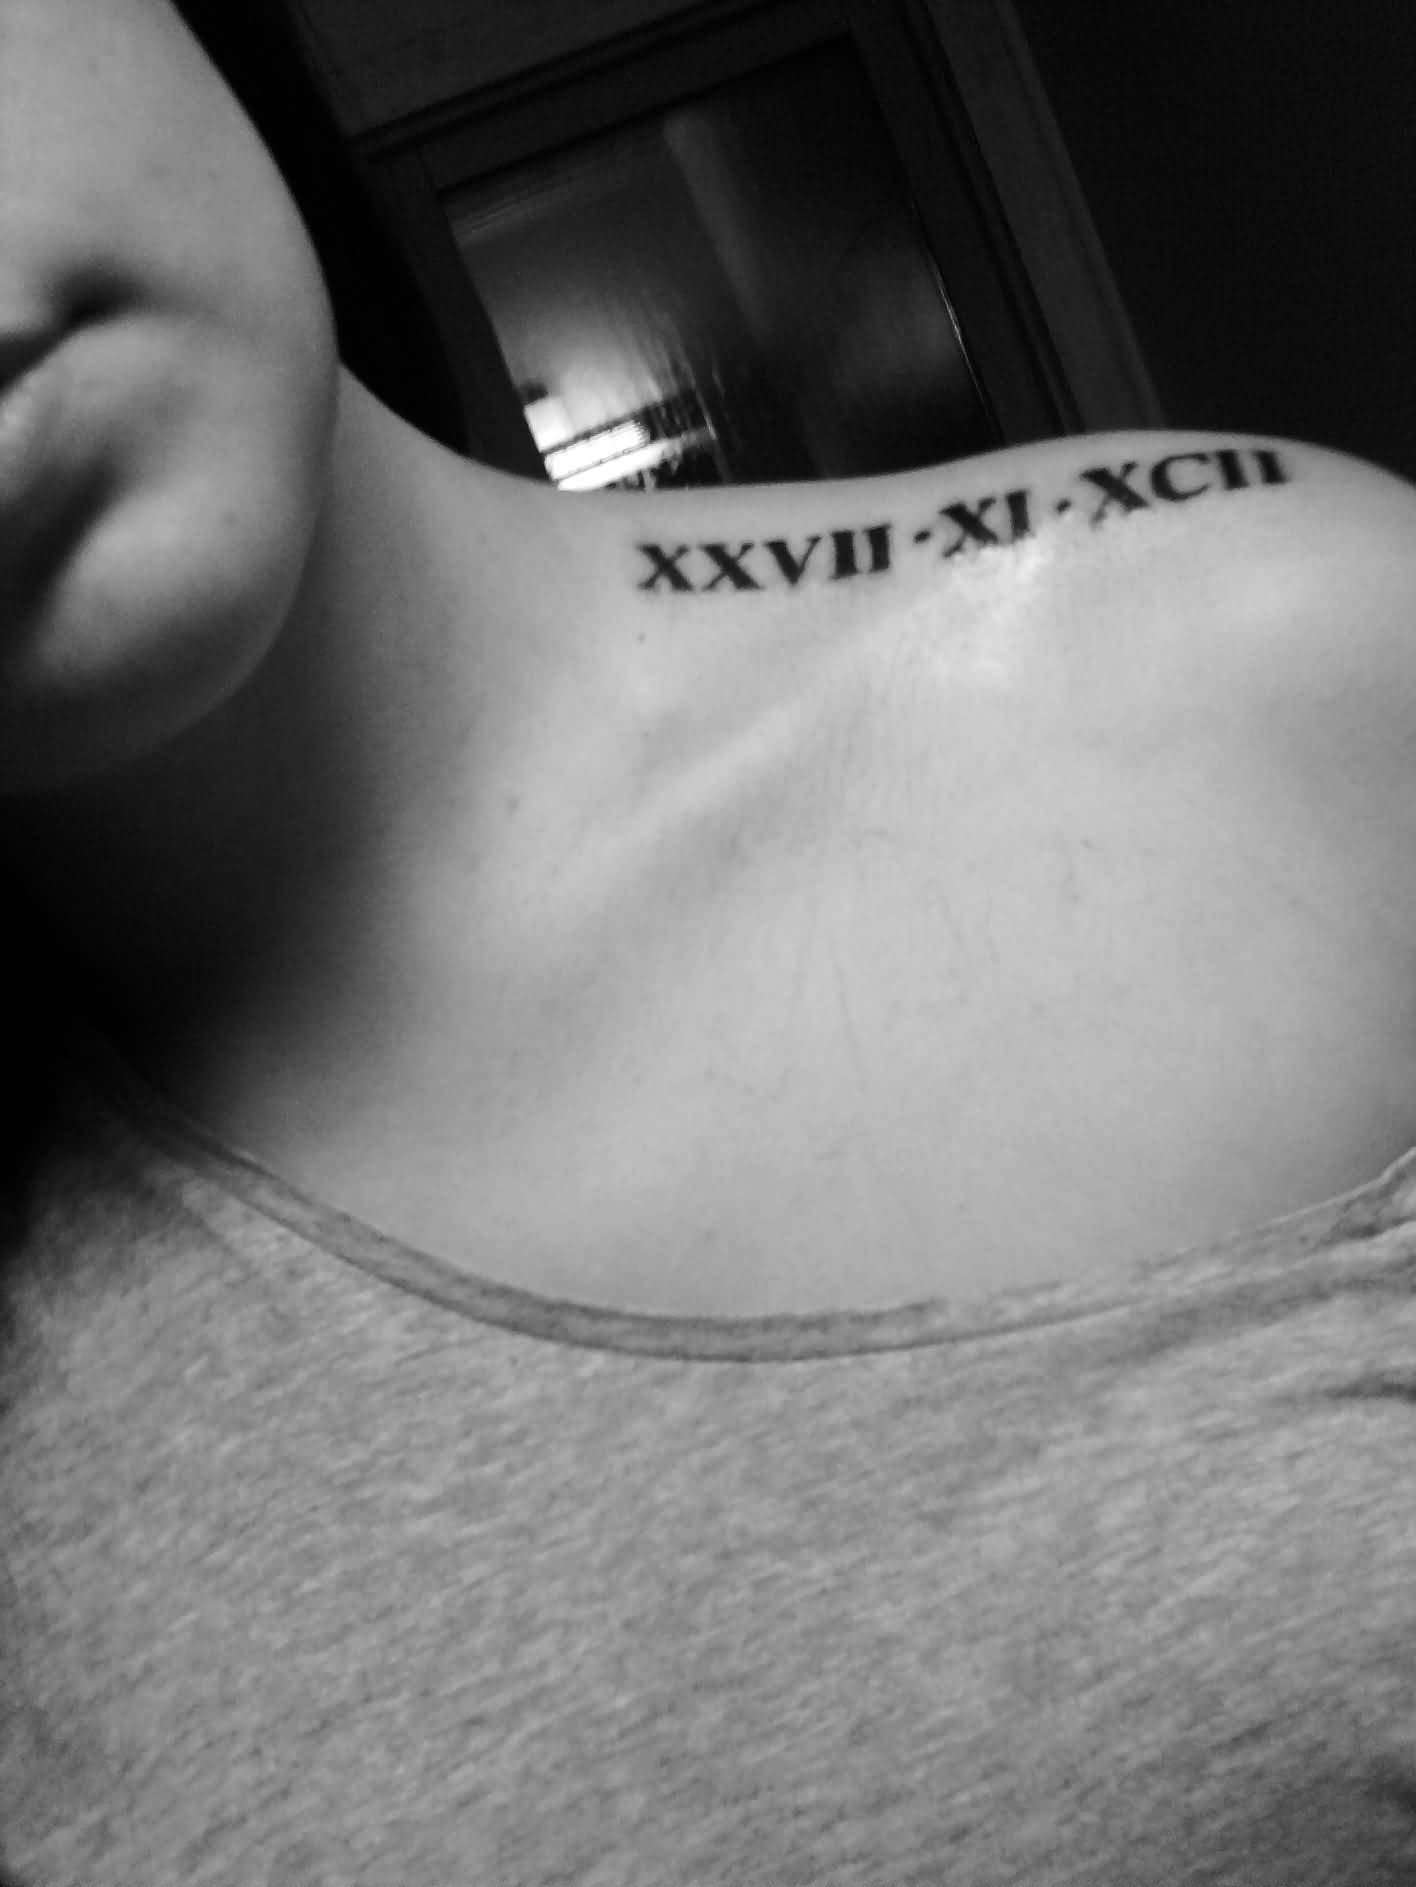 21 Amazing Shoulder Roman Numerals Tattoos intended for dimensions 1416 X 1887